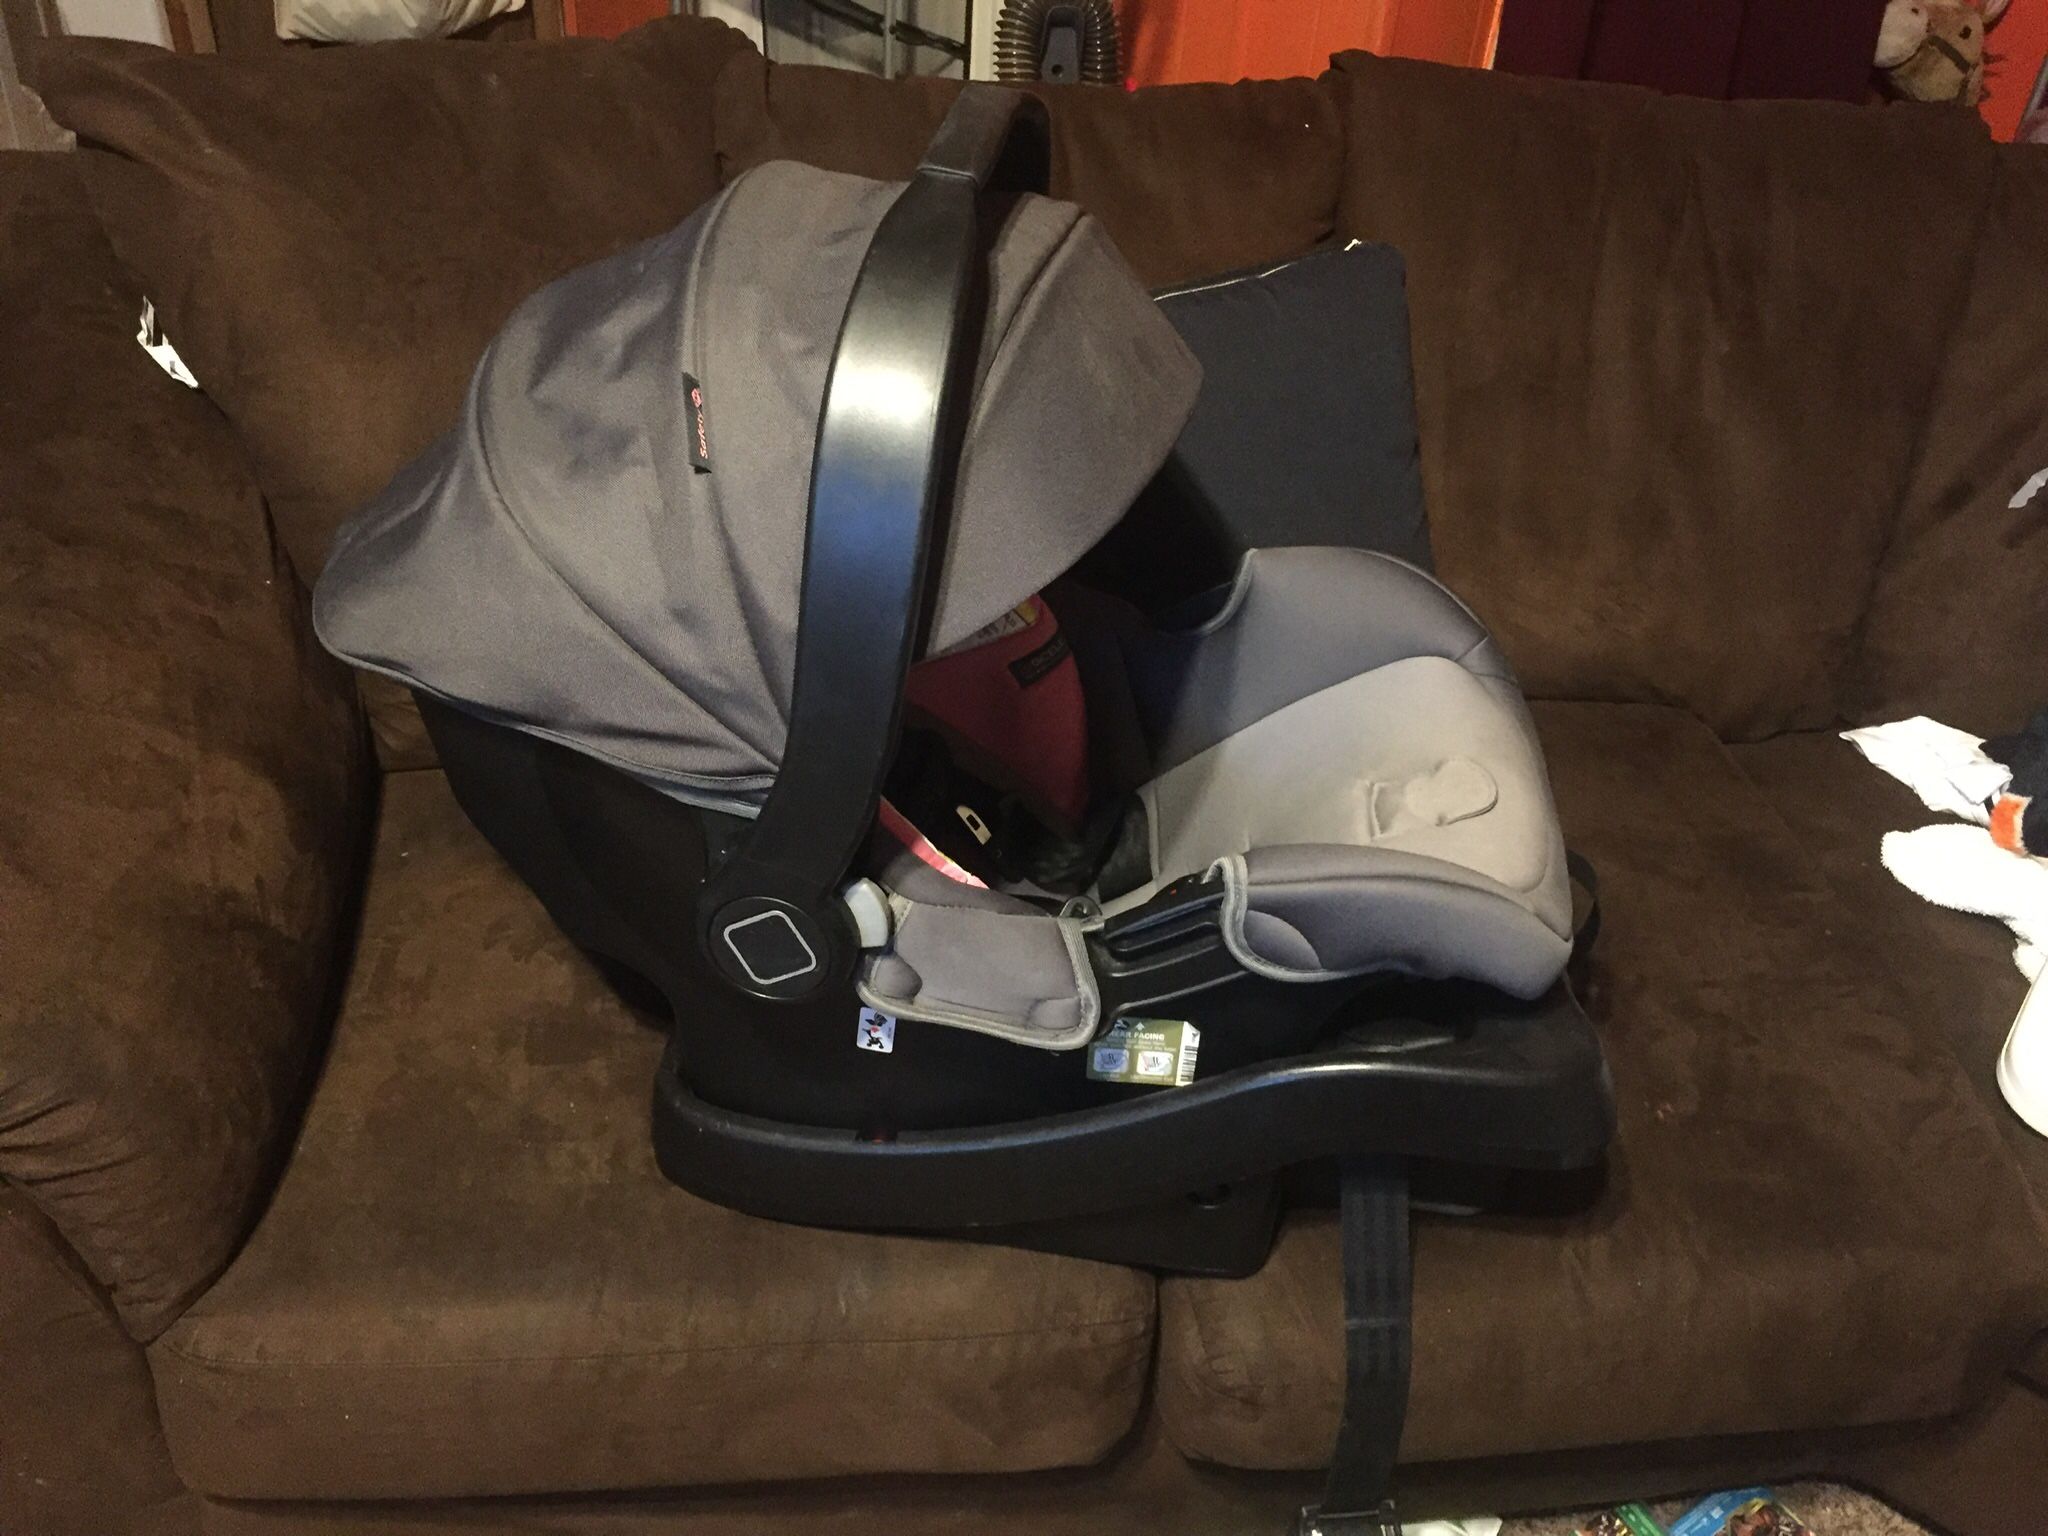 Safety 1st Car seat 